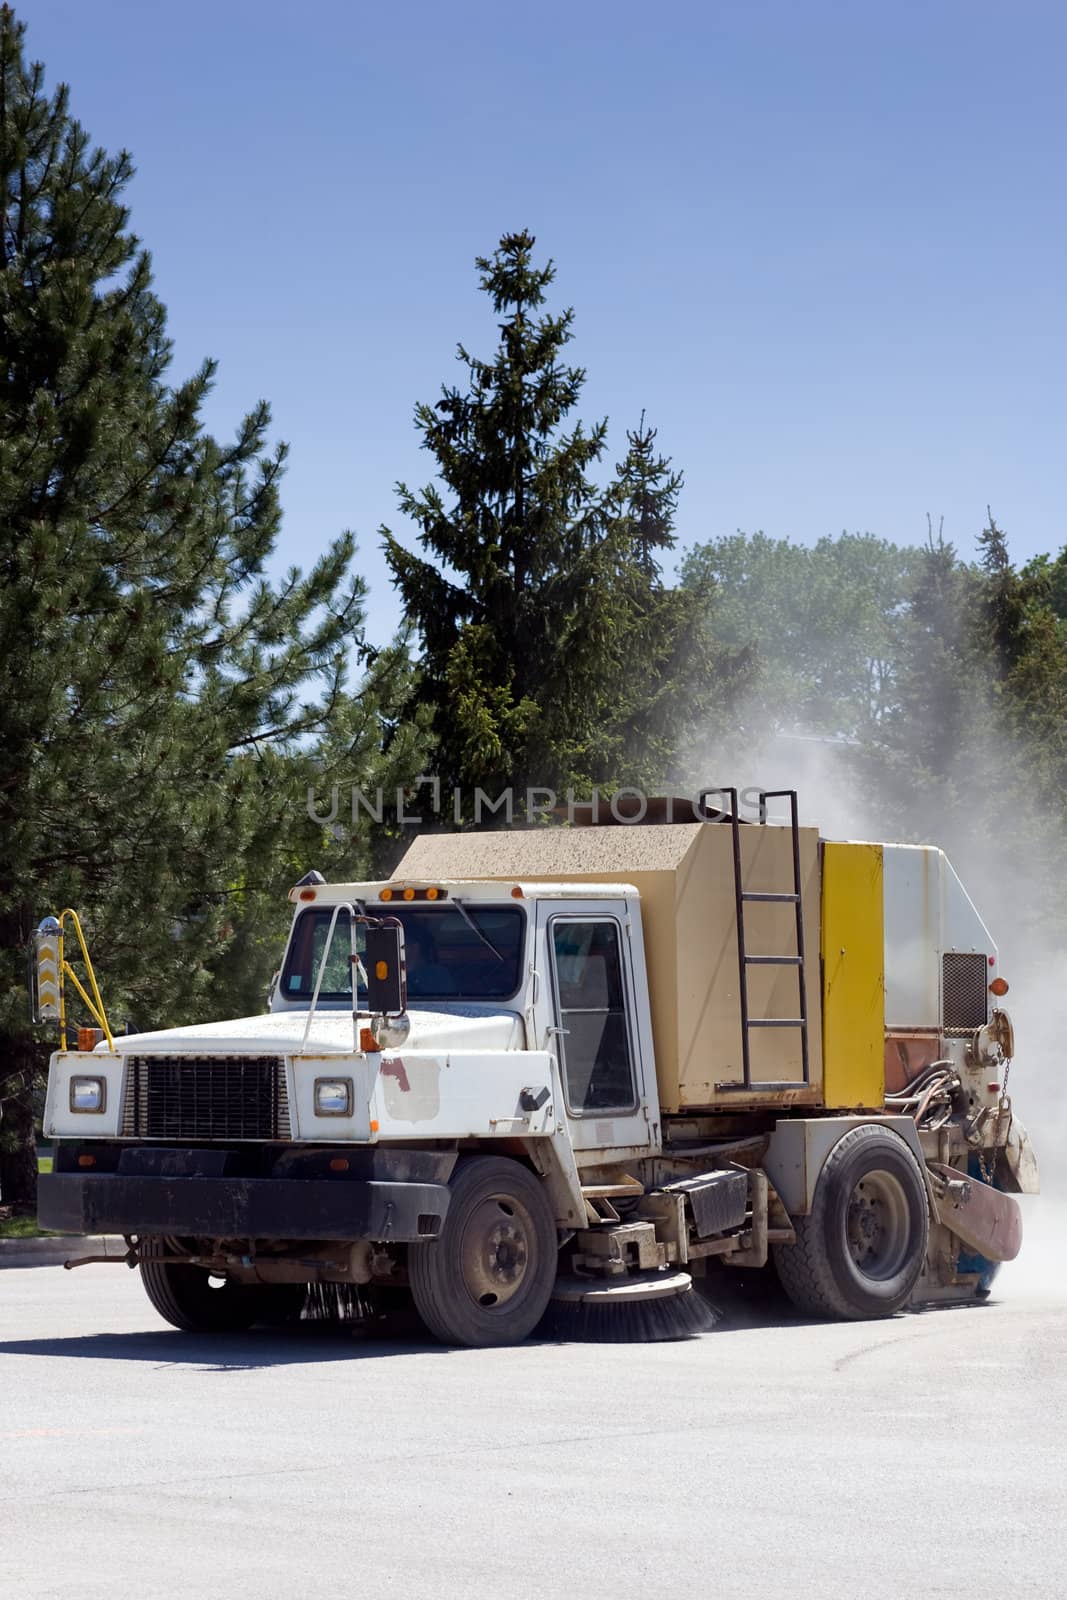 A street sweeper truck cleaning a parking lot with a dust cloud behind.